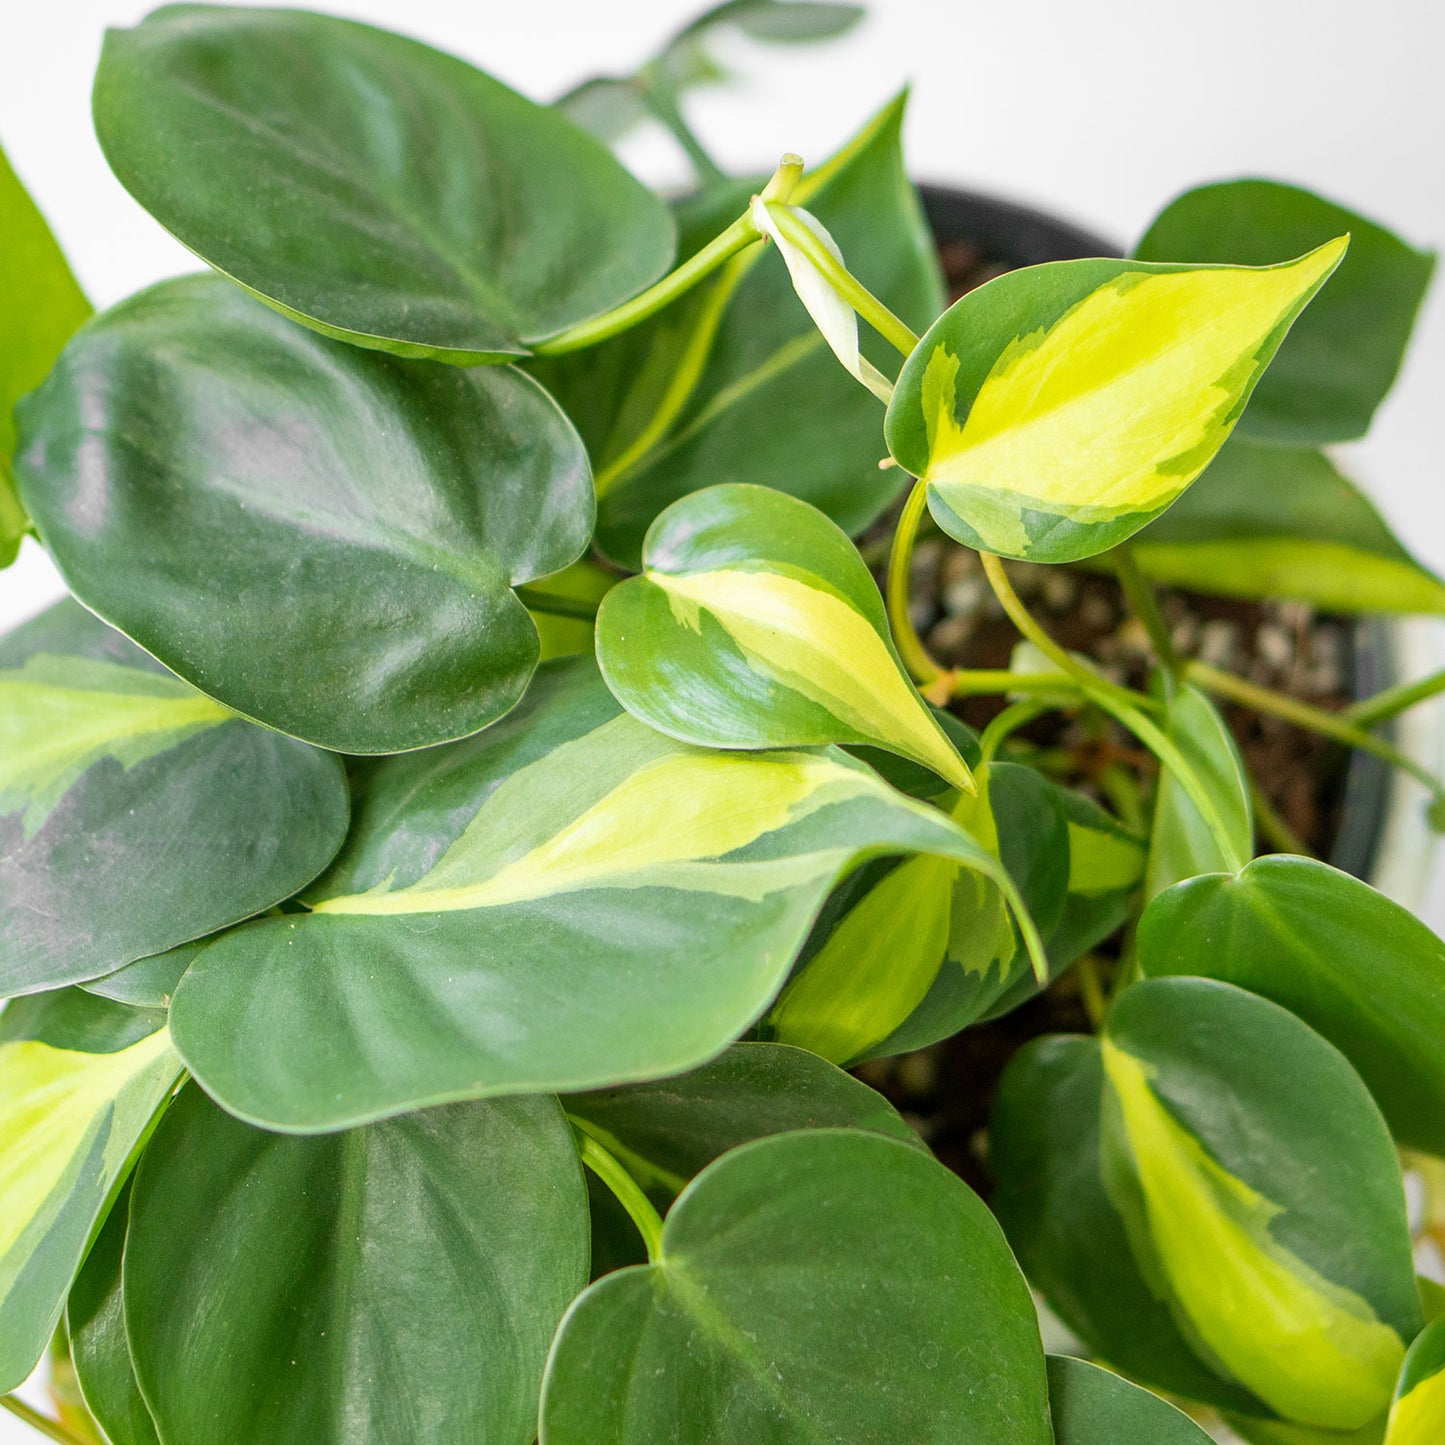 Leaves of Potted Easy-Care Houseplant Phillodendron Scandens Brasil 6” - Buy repotted easy-care indoor plant Philodendron Scandens Brasil for delivery at Planteia